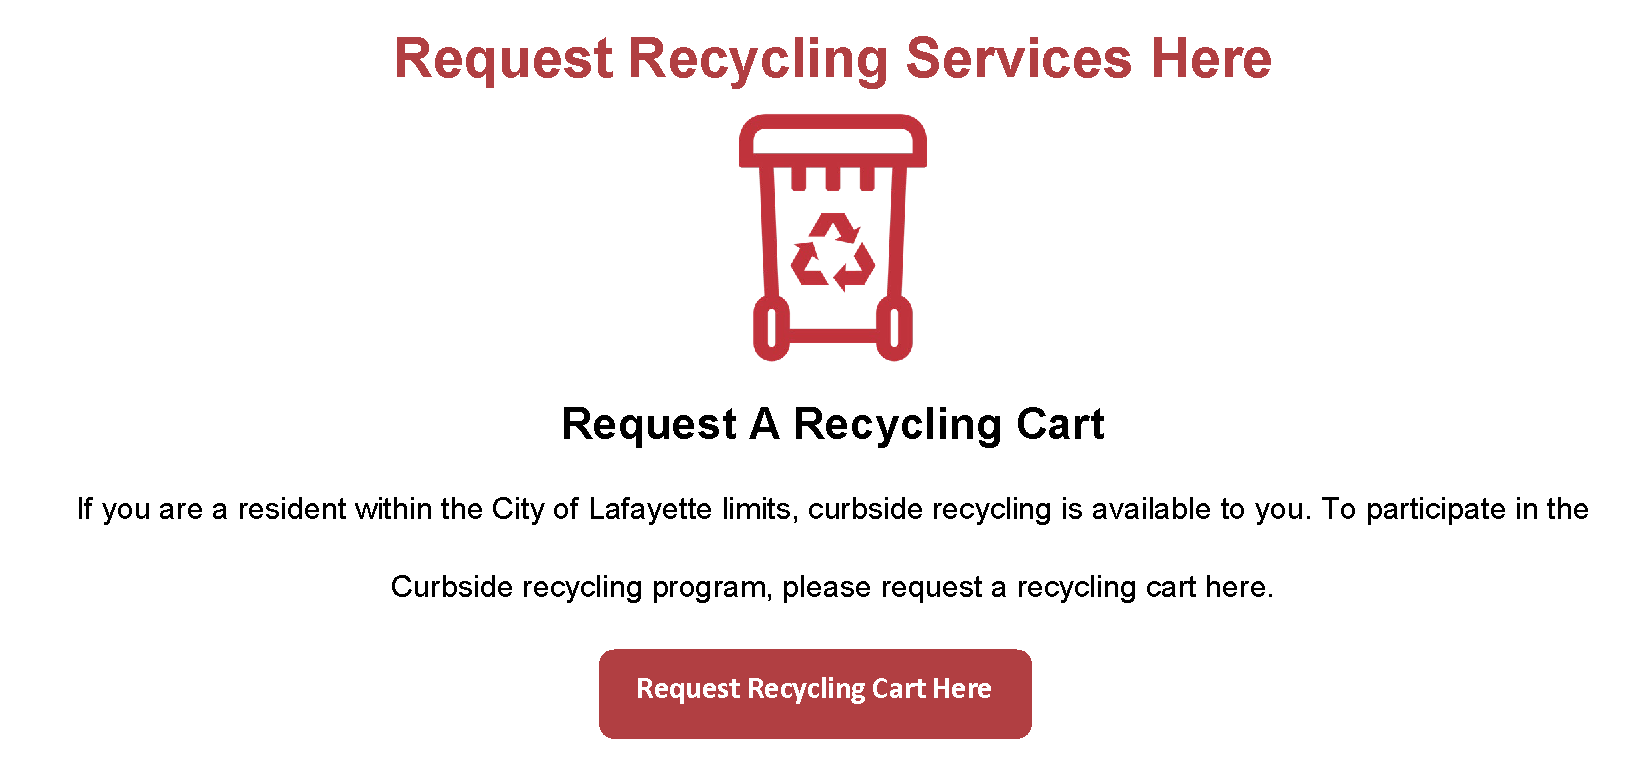 Request-Recycling-Services-Here